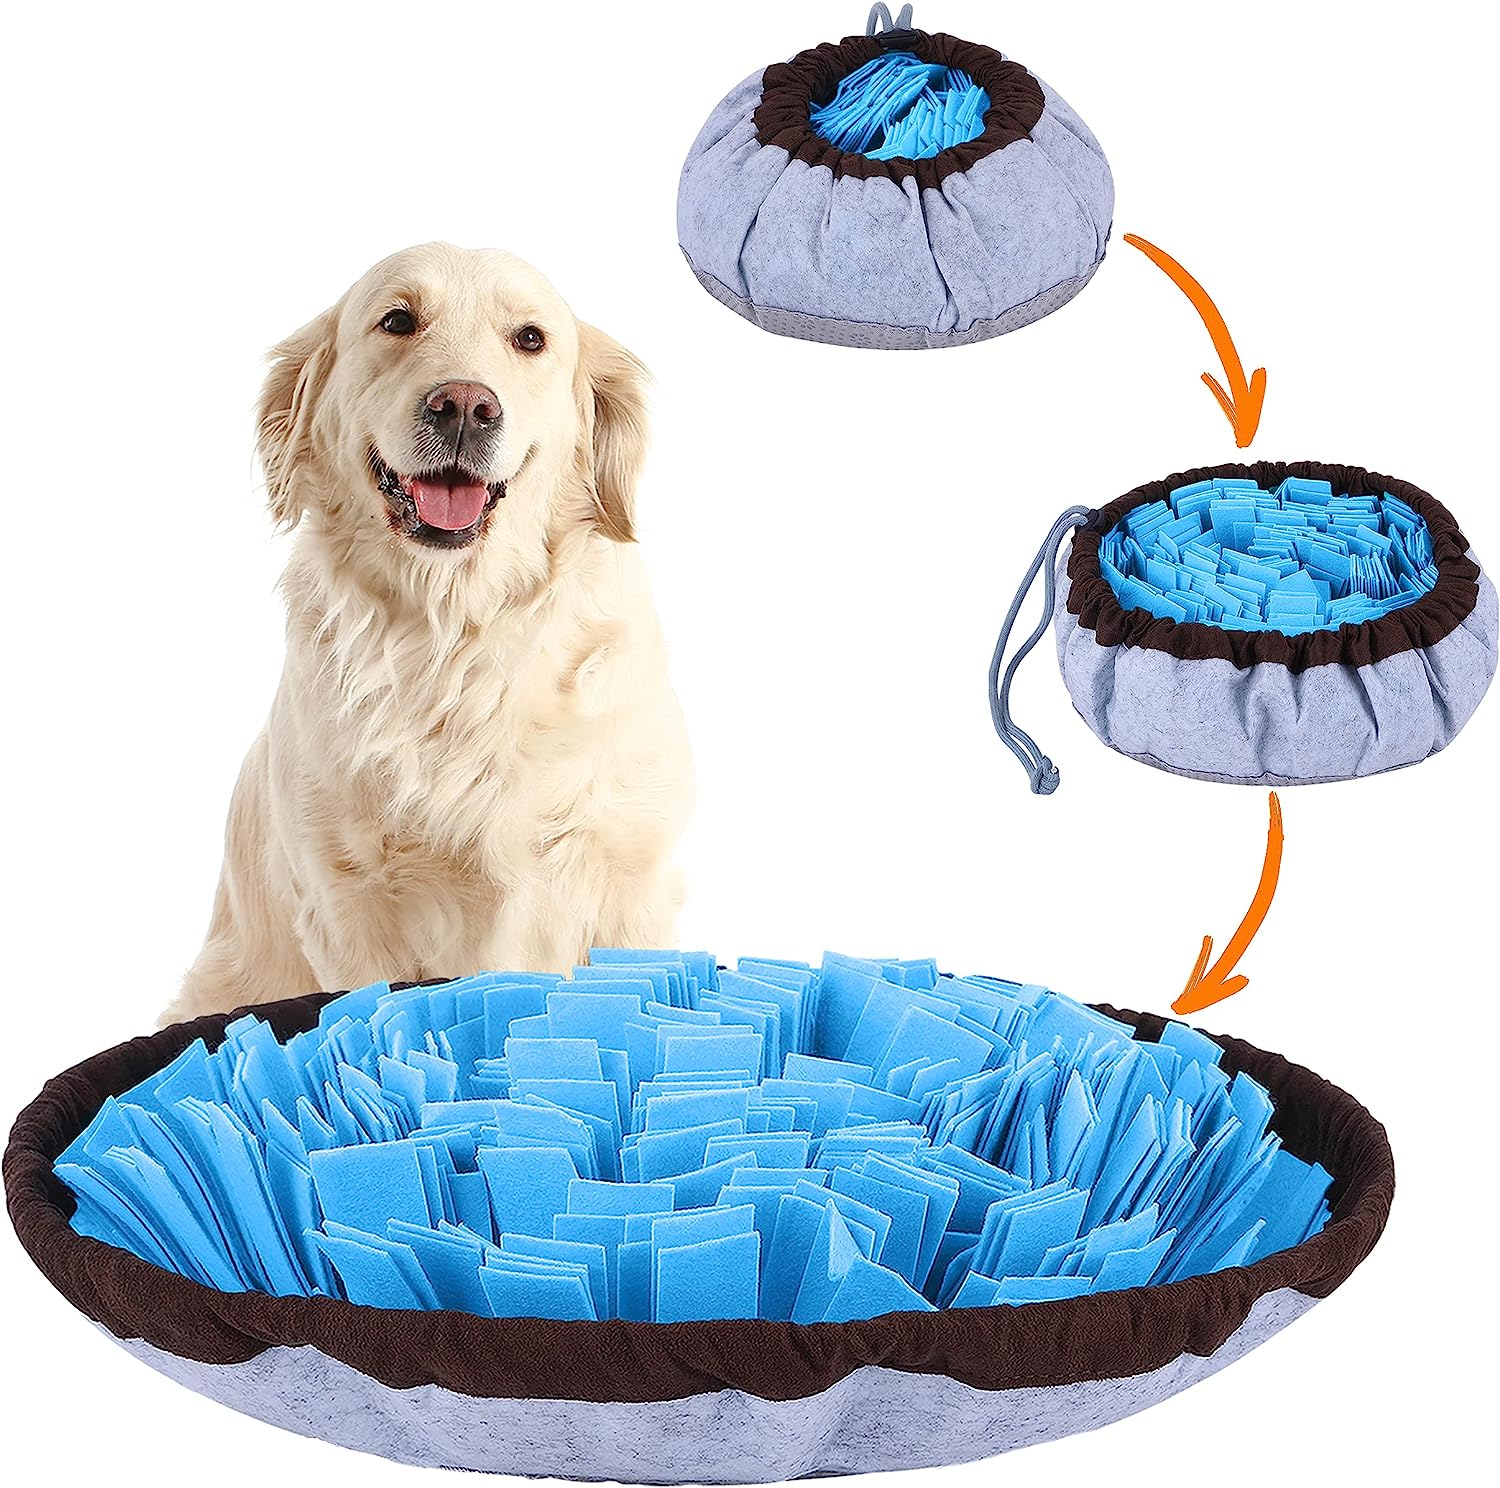 3. Pet Arena Adjustable Snuffle Mat for Dogs